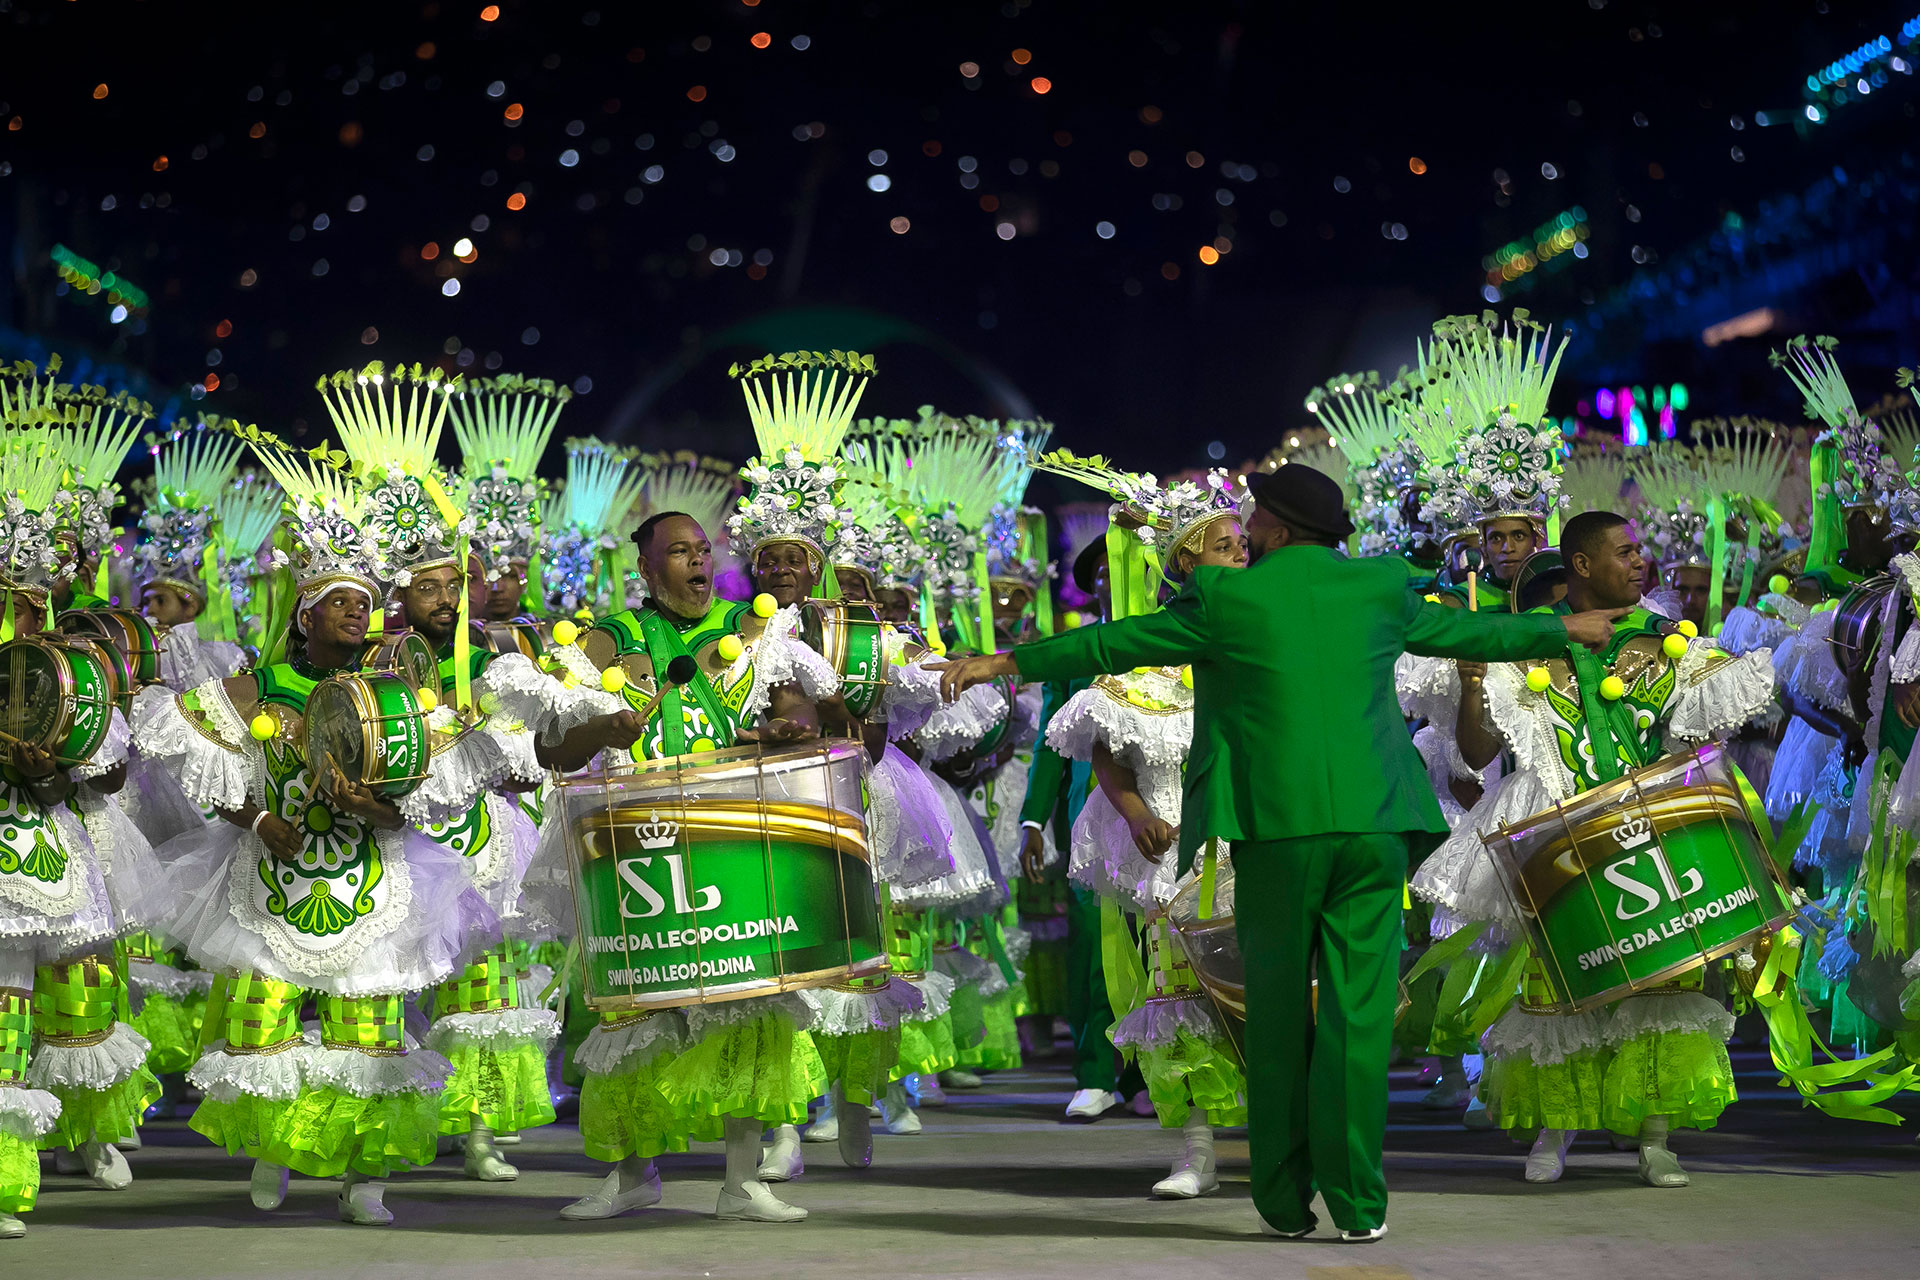 Artists from the Imperatriz Leopoldinense samba school parade on a float during Carnival celebrations